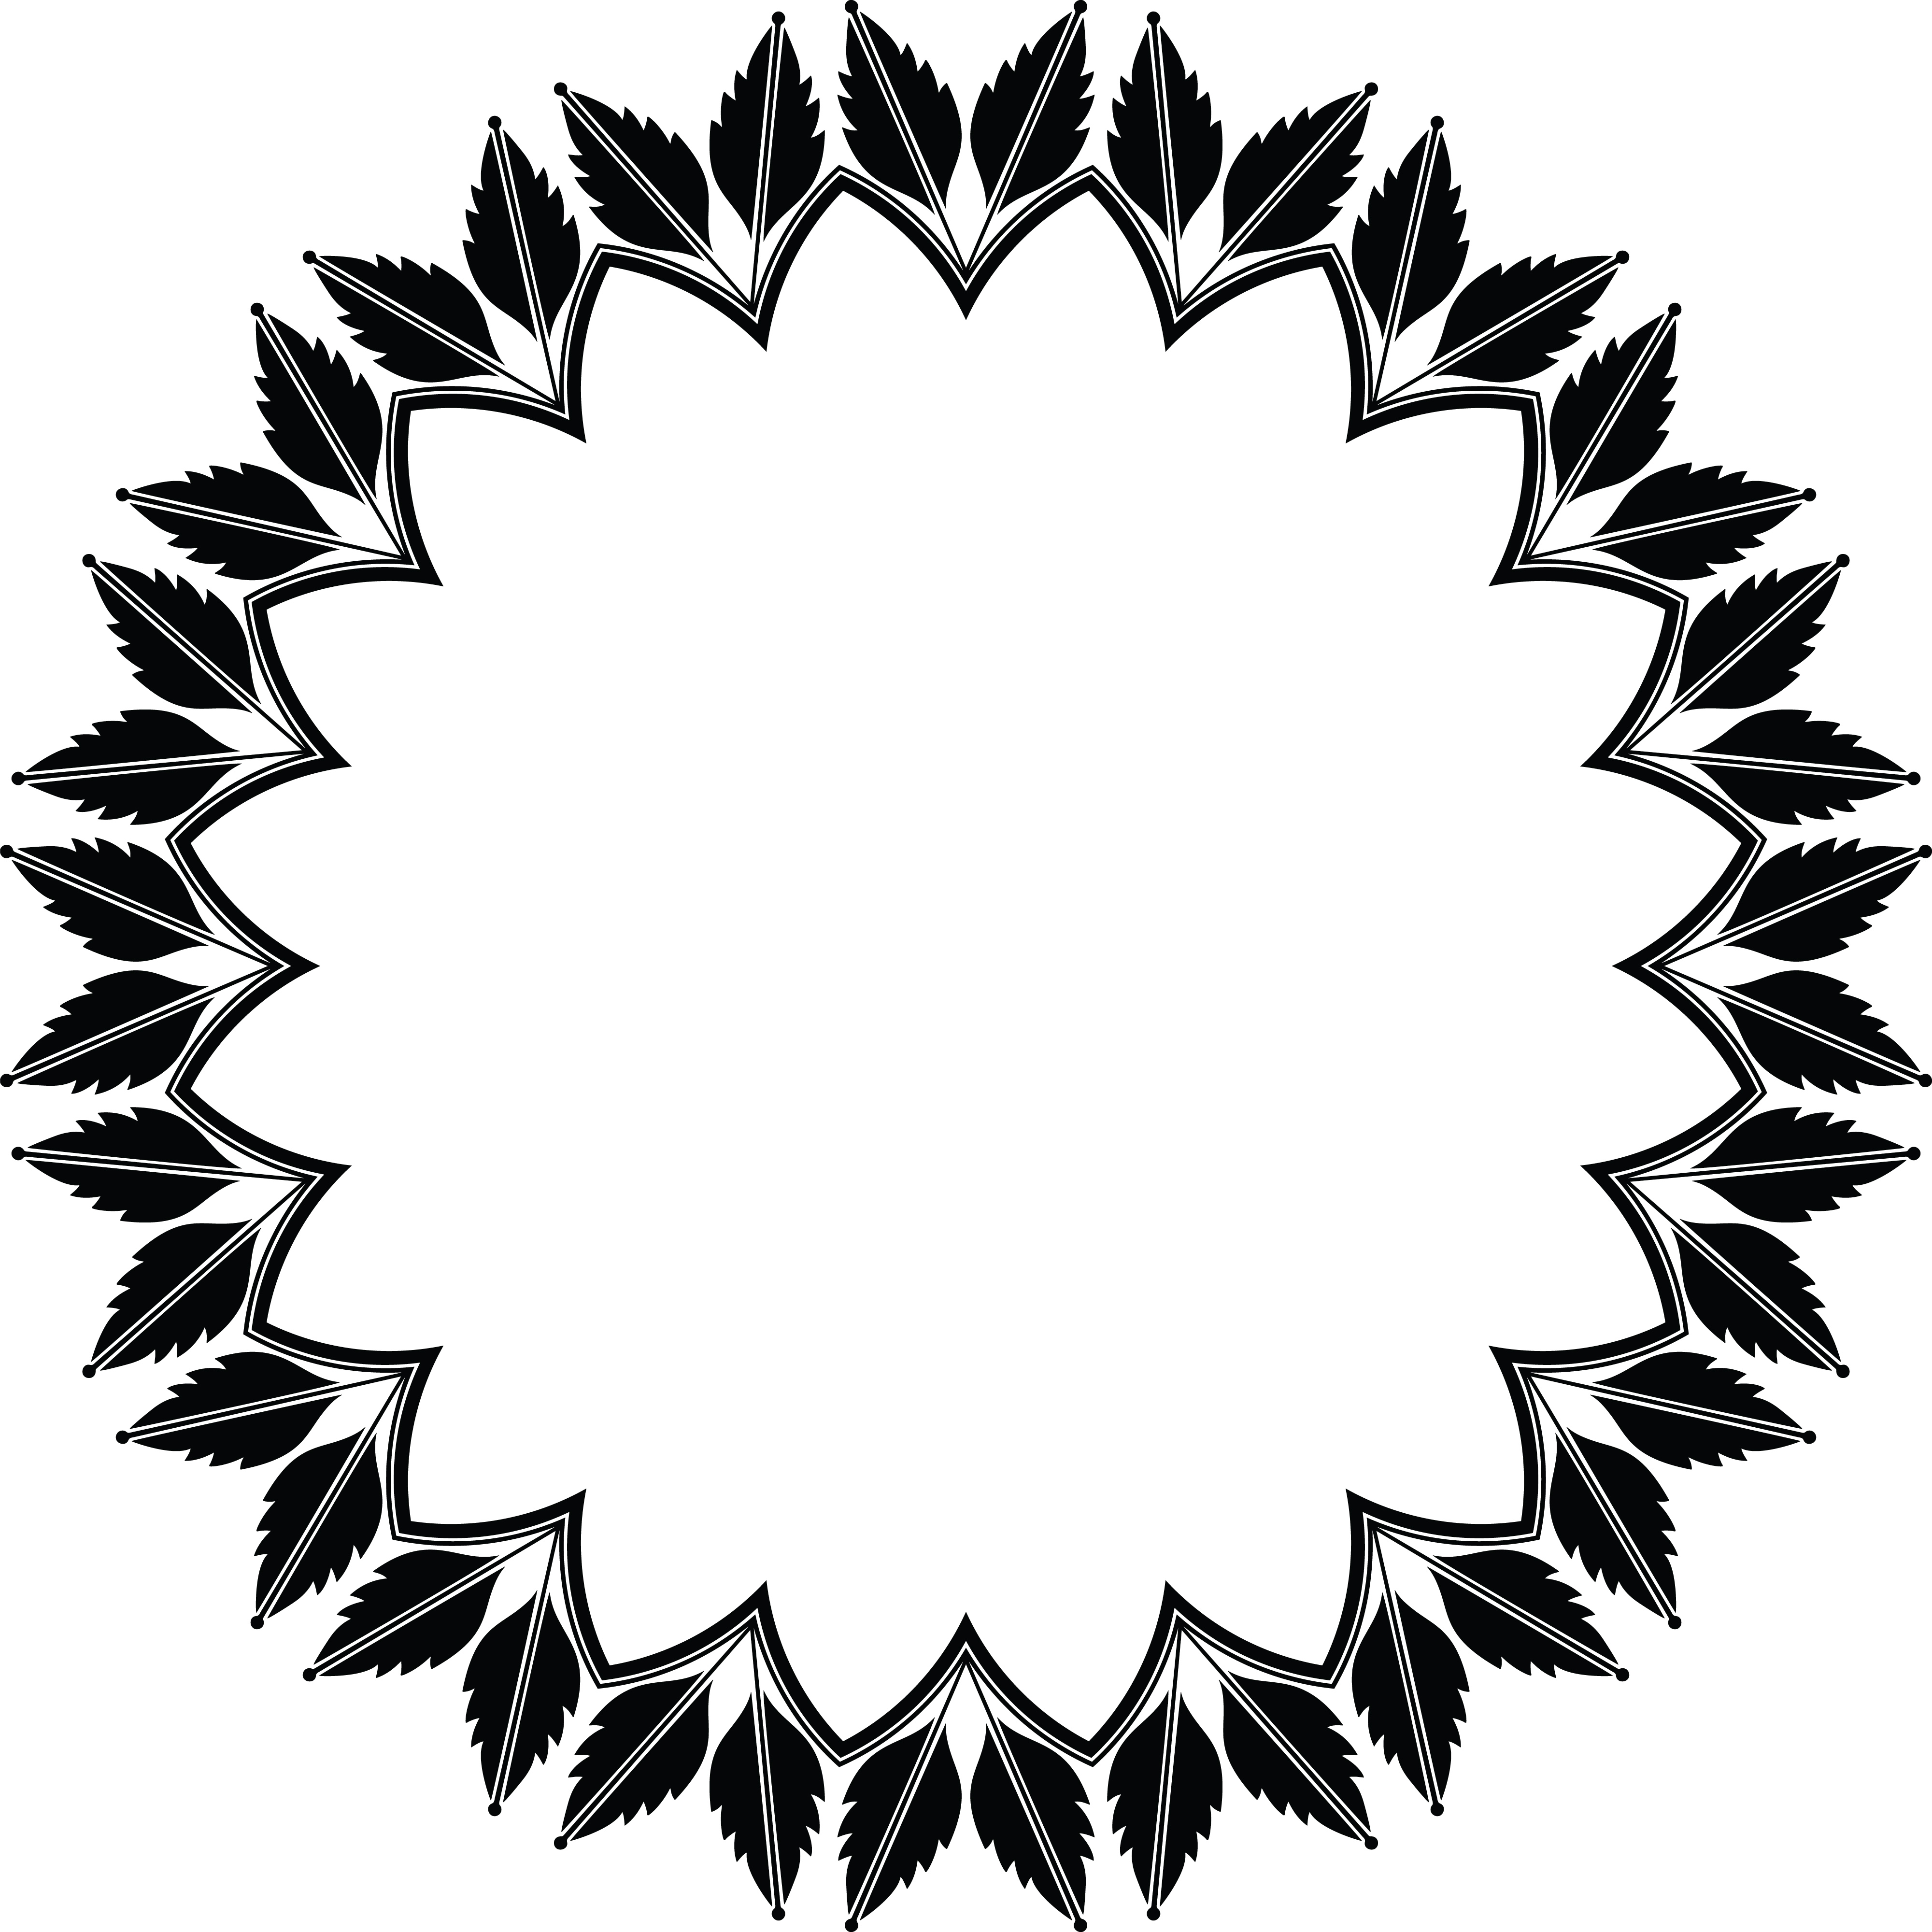 Free Clipart Of A frame design element.